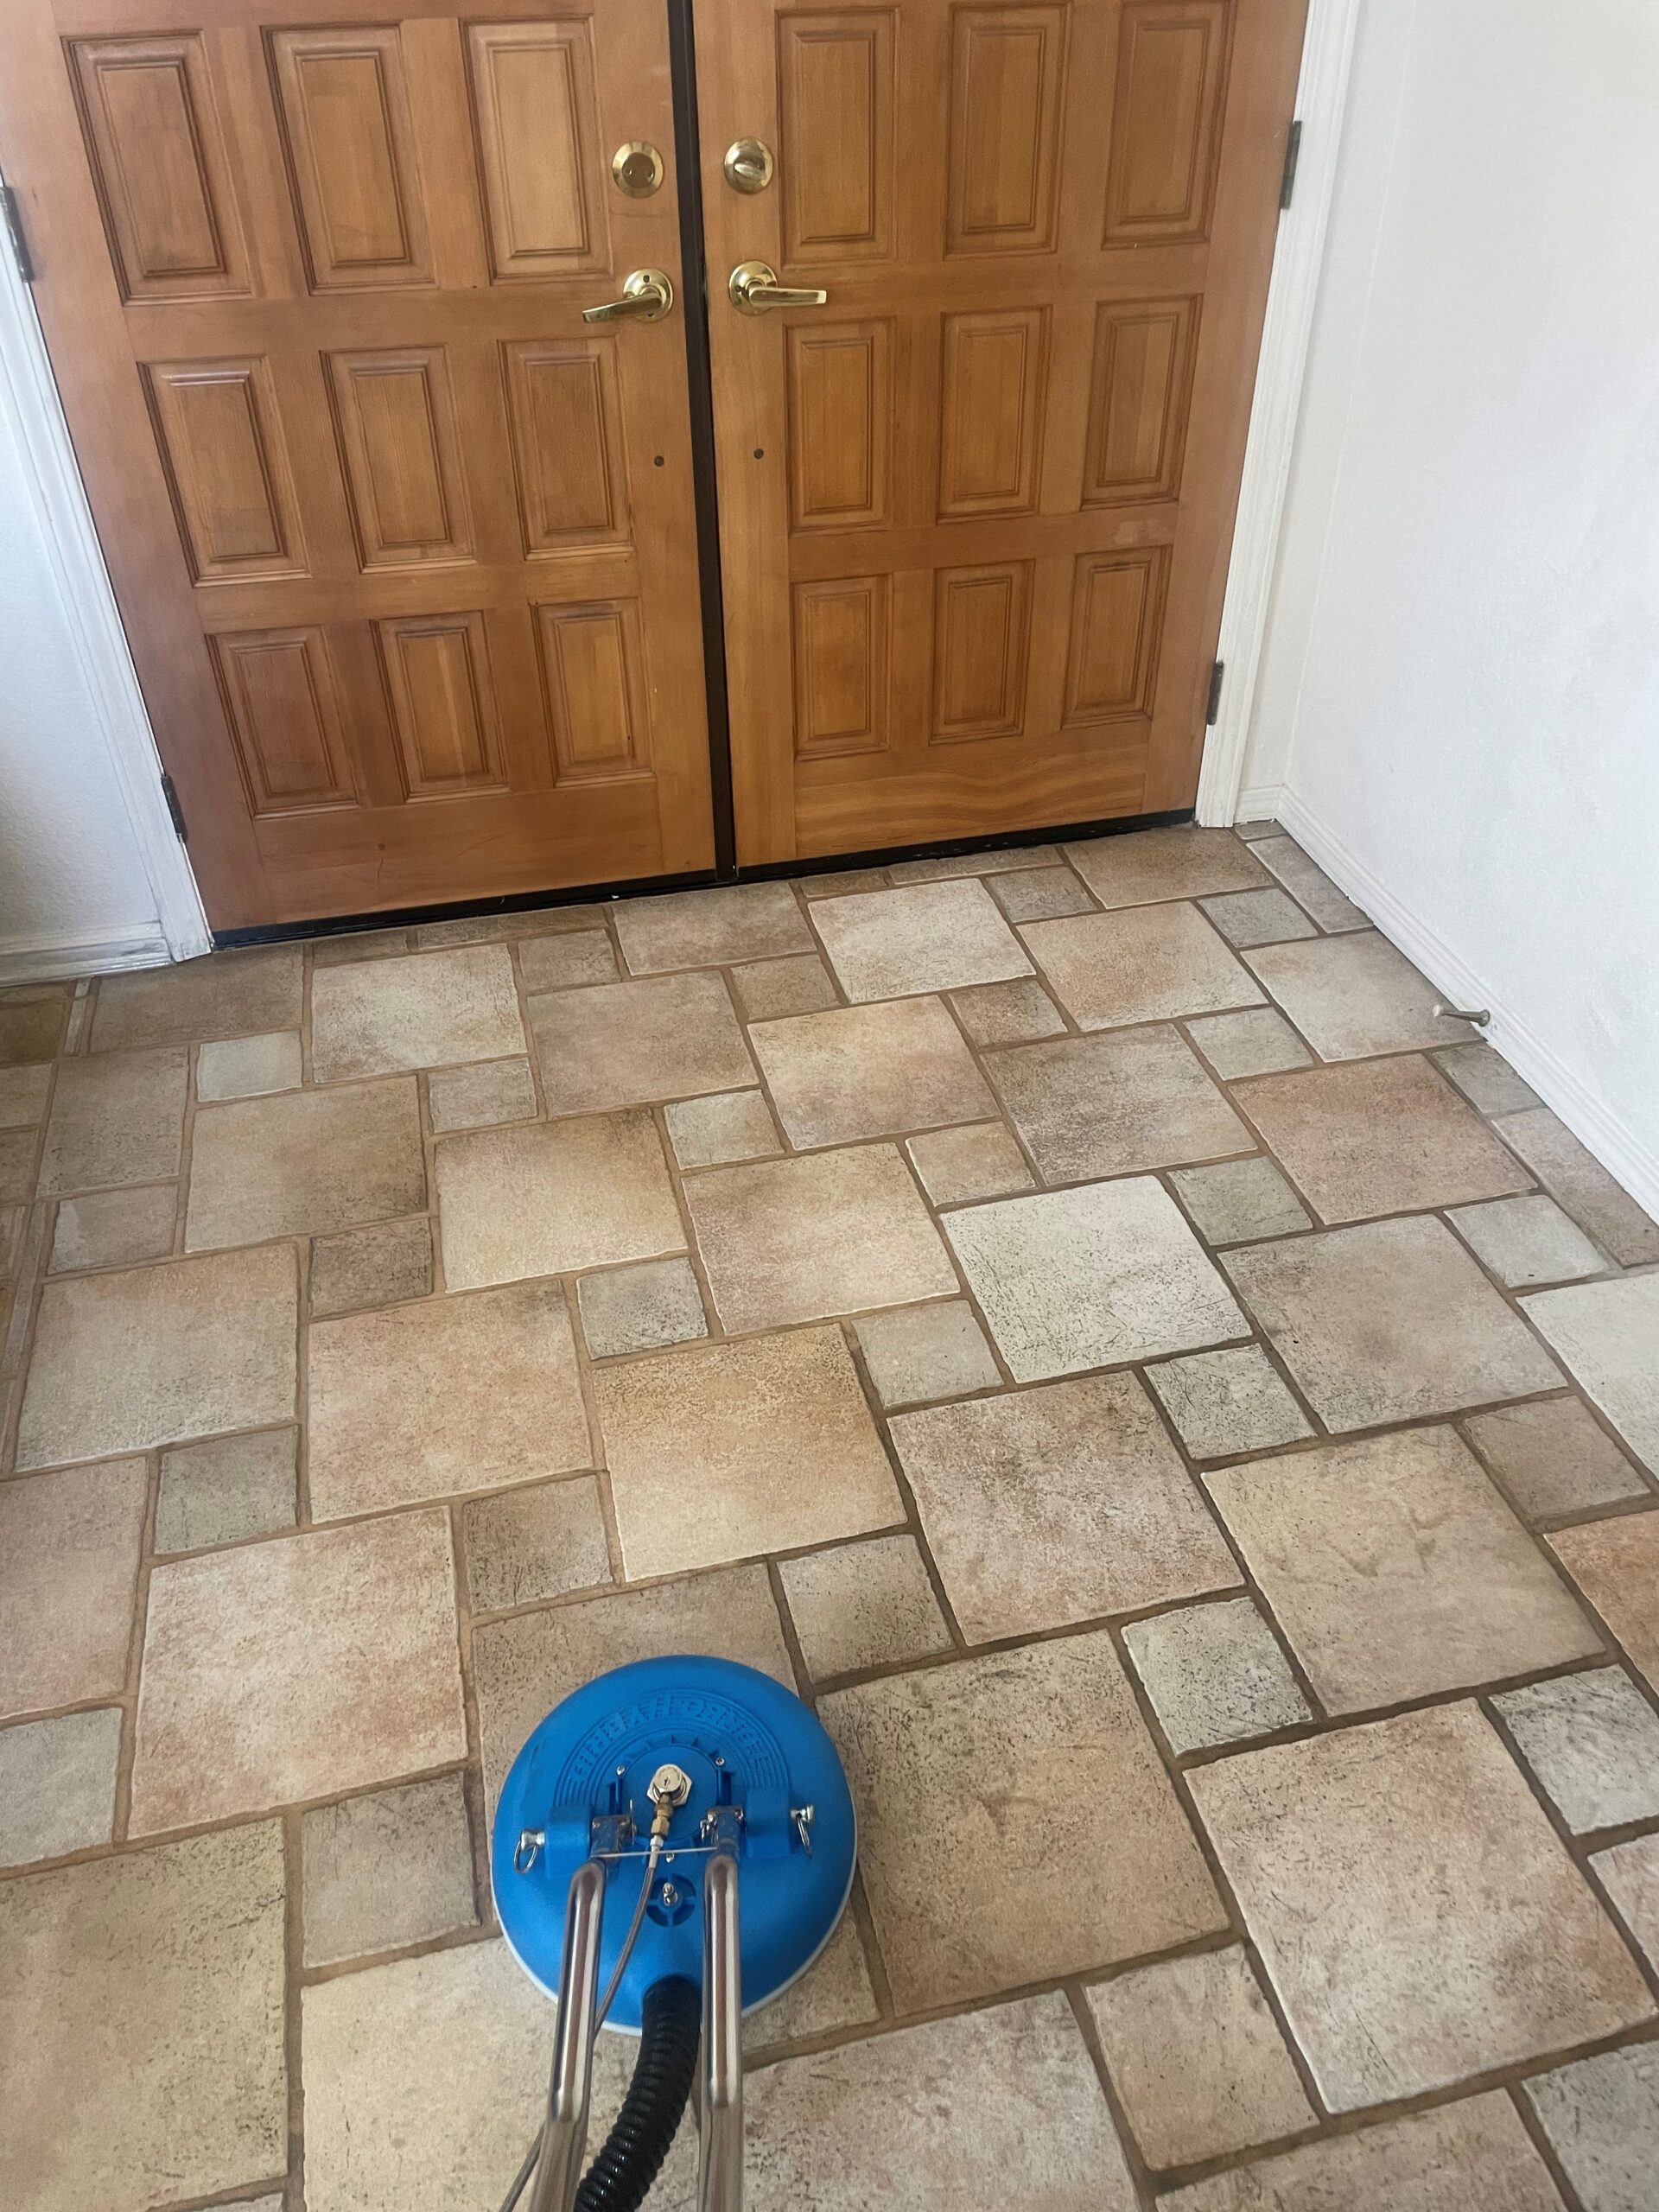 San Diego Tile and Grout Cleaning by Lilys Restorations